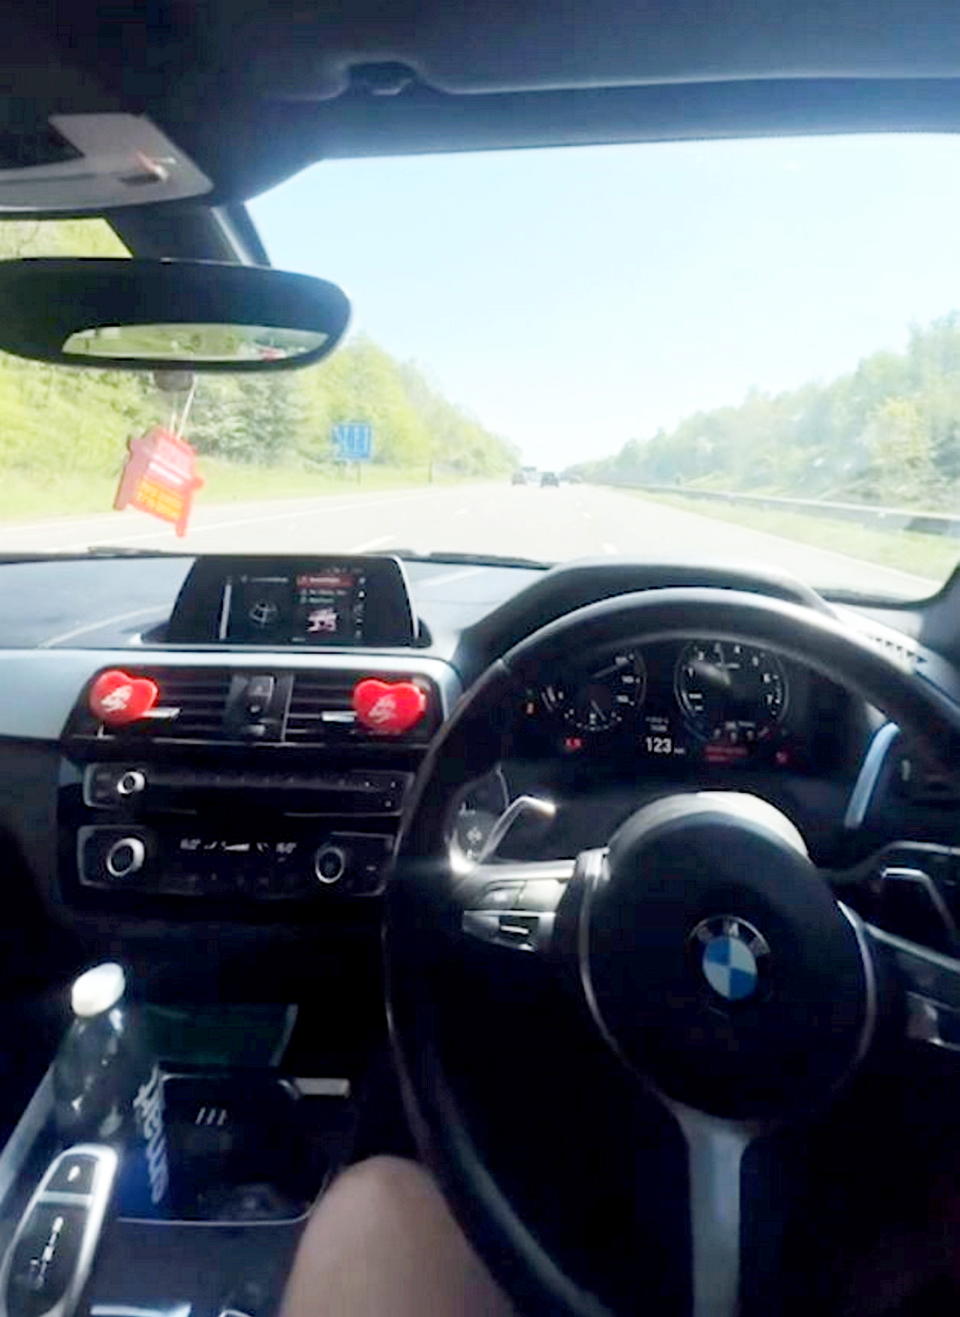 Adil Iqubal filming himself driving at speeds of 123mph before the collision. (SWNS)